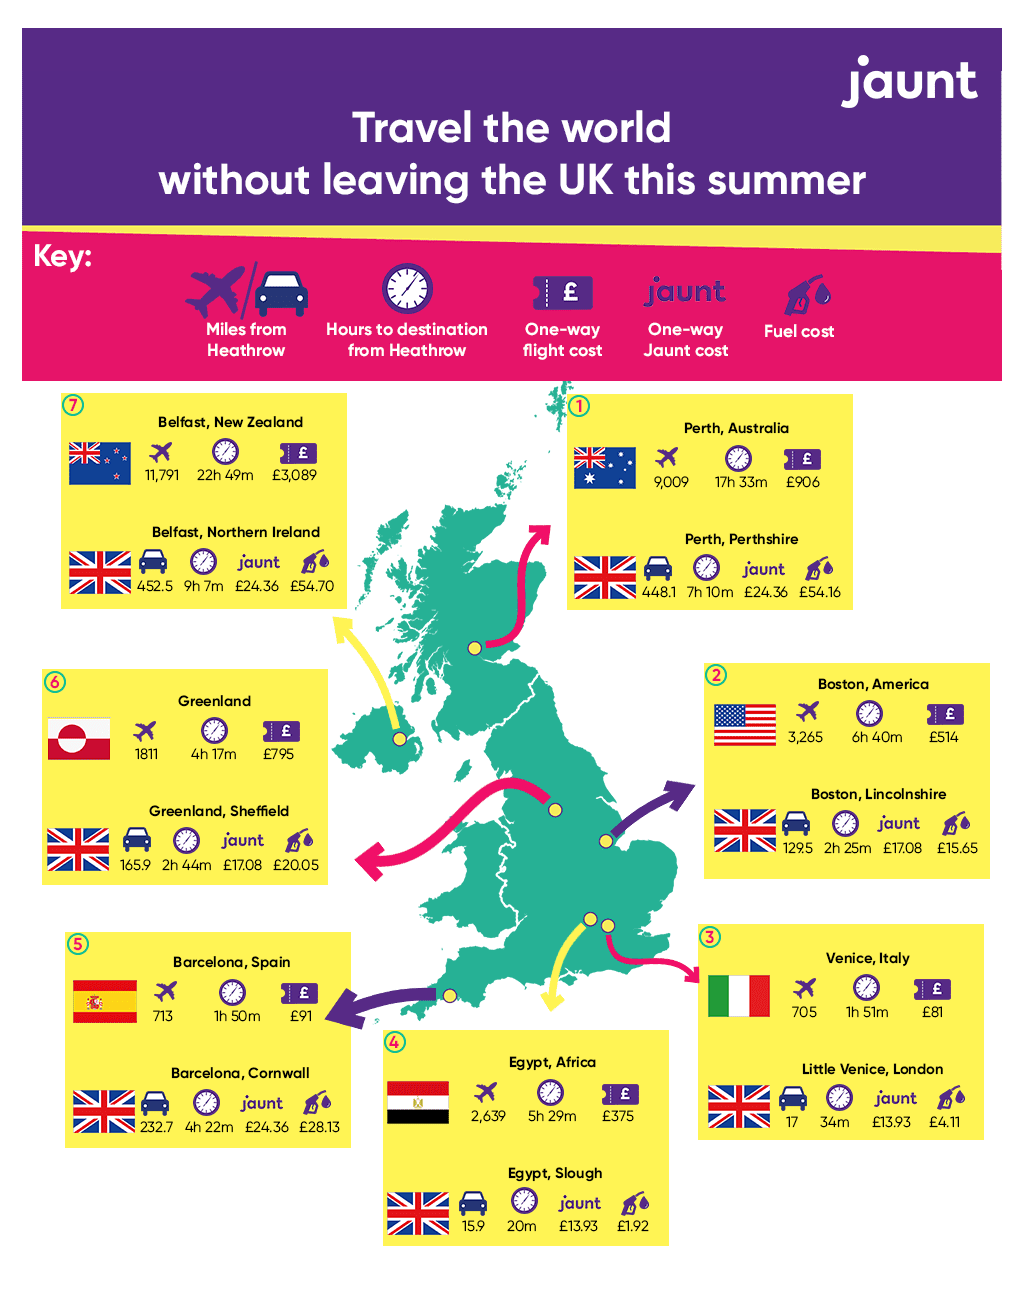 travel-the-world-without-leaving-the-uk-jaunt-insurance-infographic